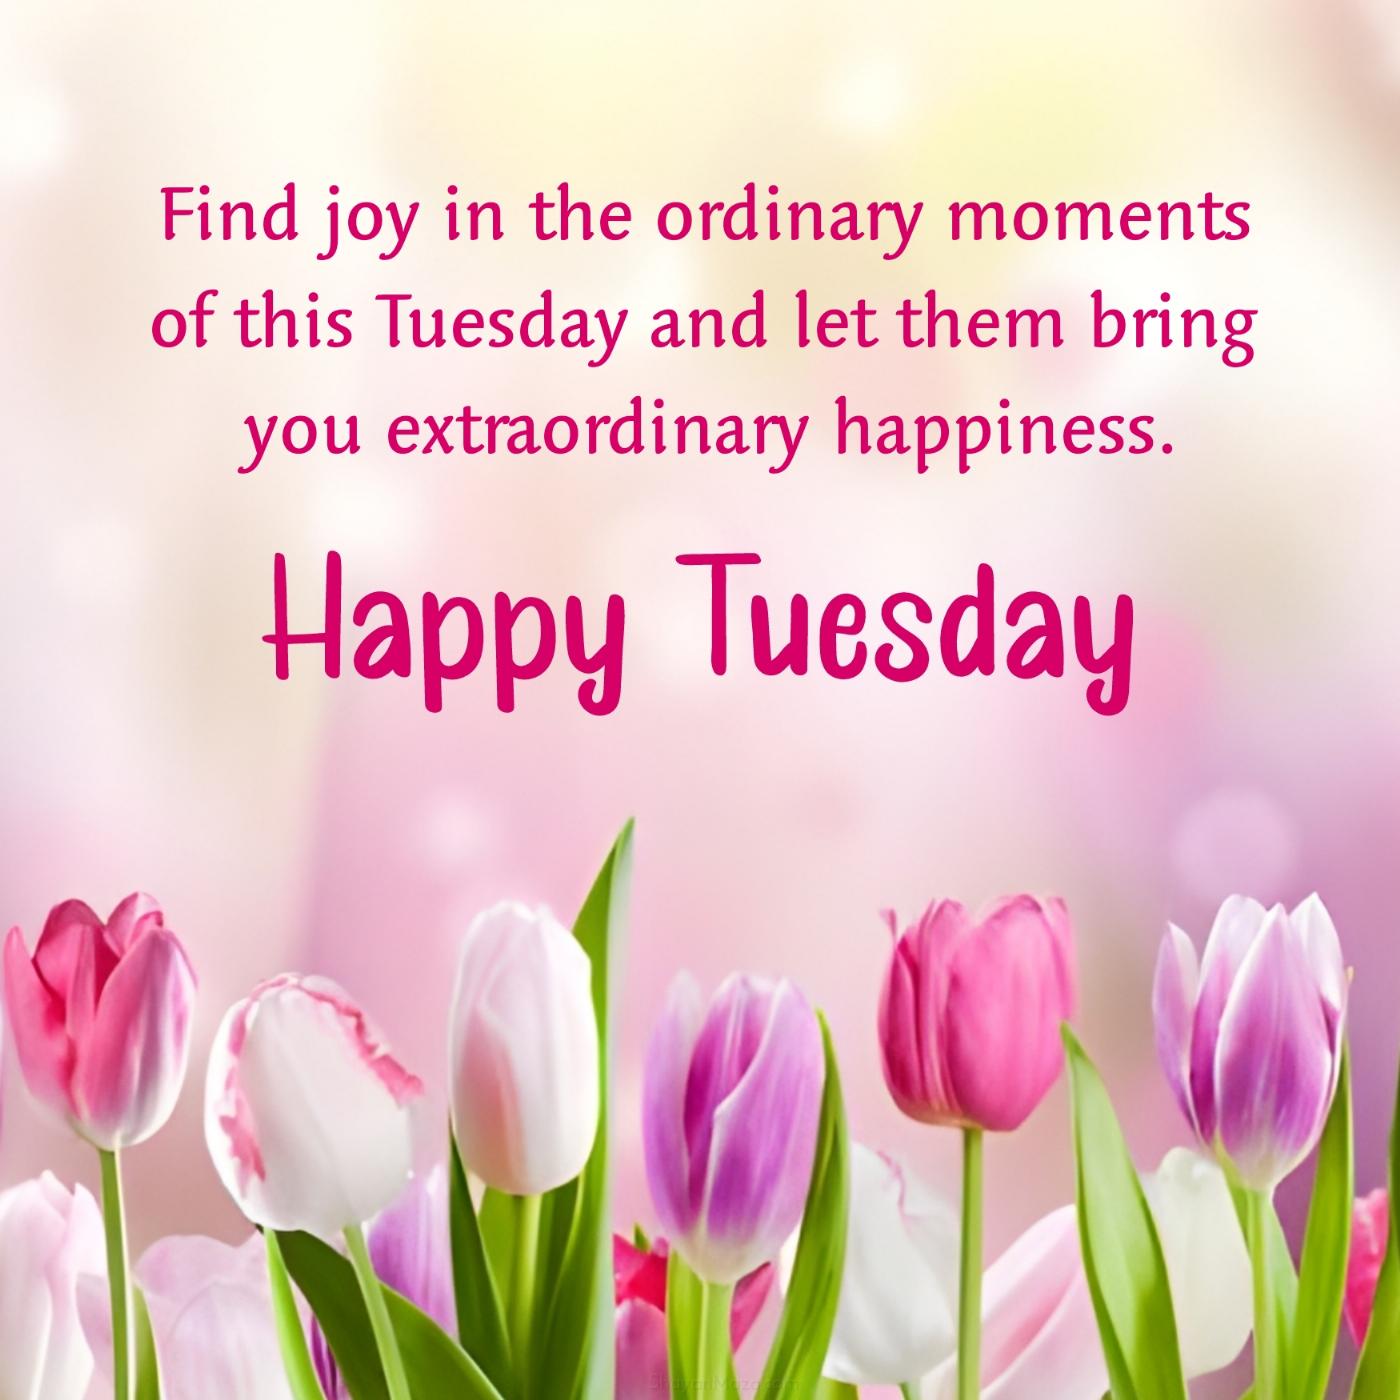 Find joy in the ordinary moments of this Tuesday